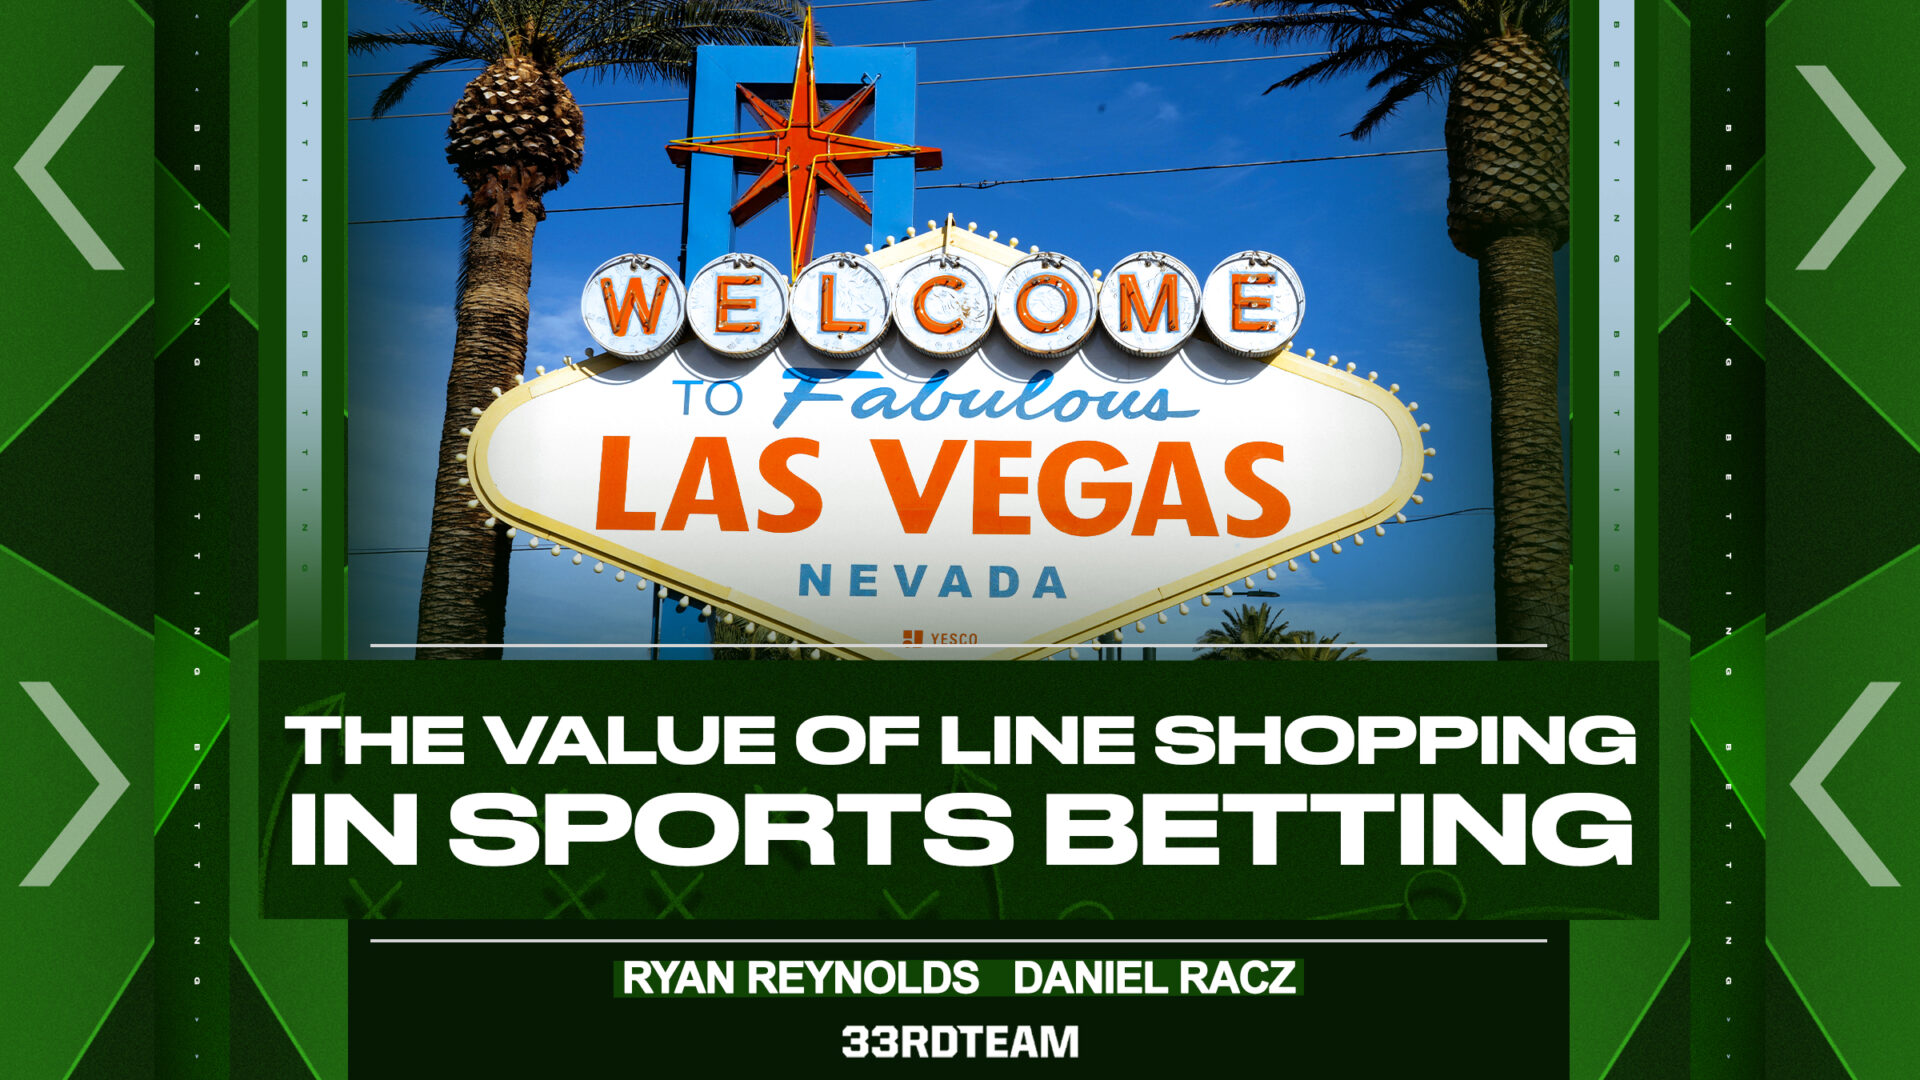 Line shopping sports betting